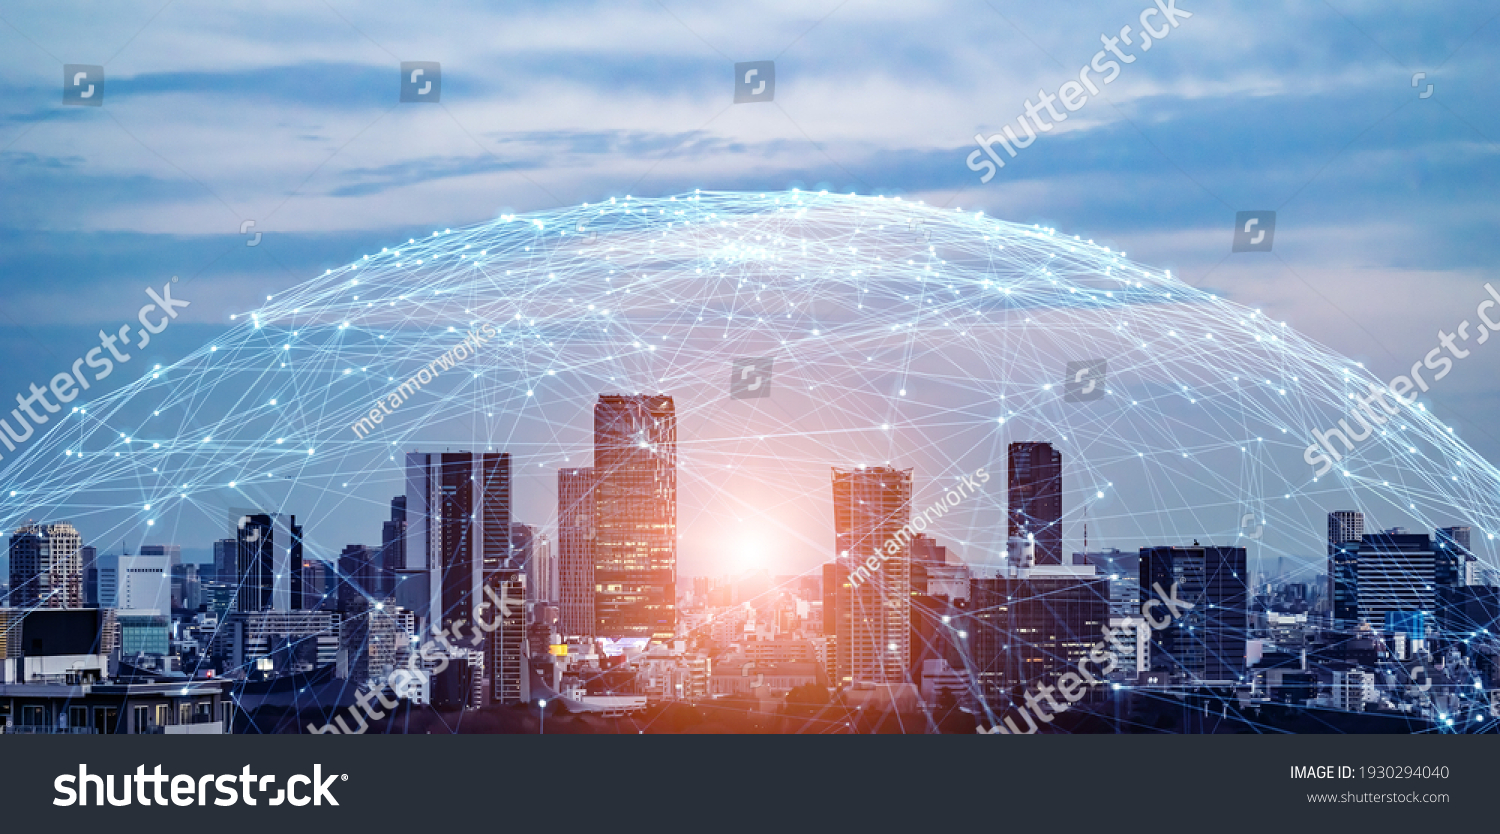 Modern cityscape and communication network concept. Telecommunication. IoT (Internet of Things). ICT (Information communication Technology). 5G. Smart city. Digital transformation. #1930294040